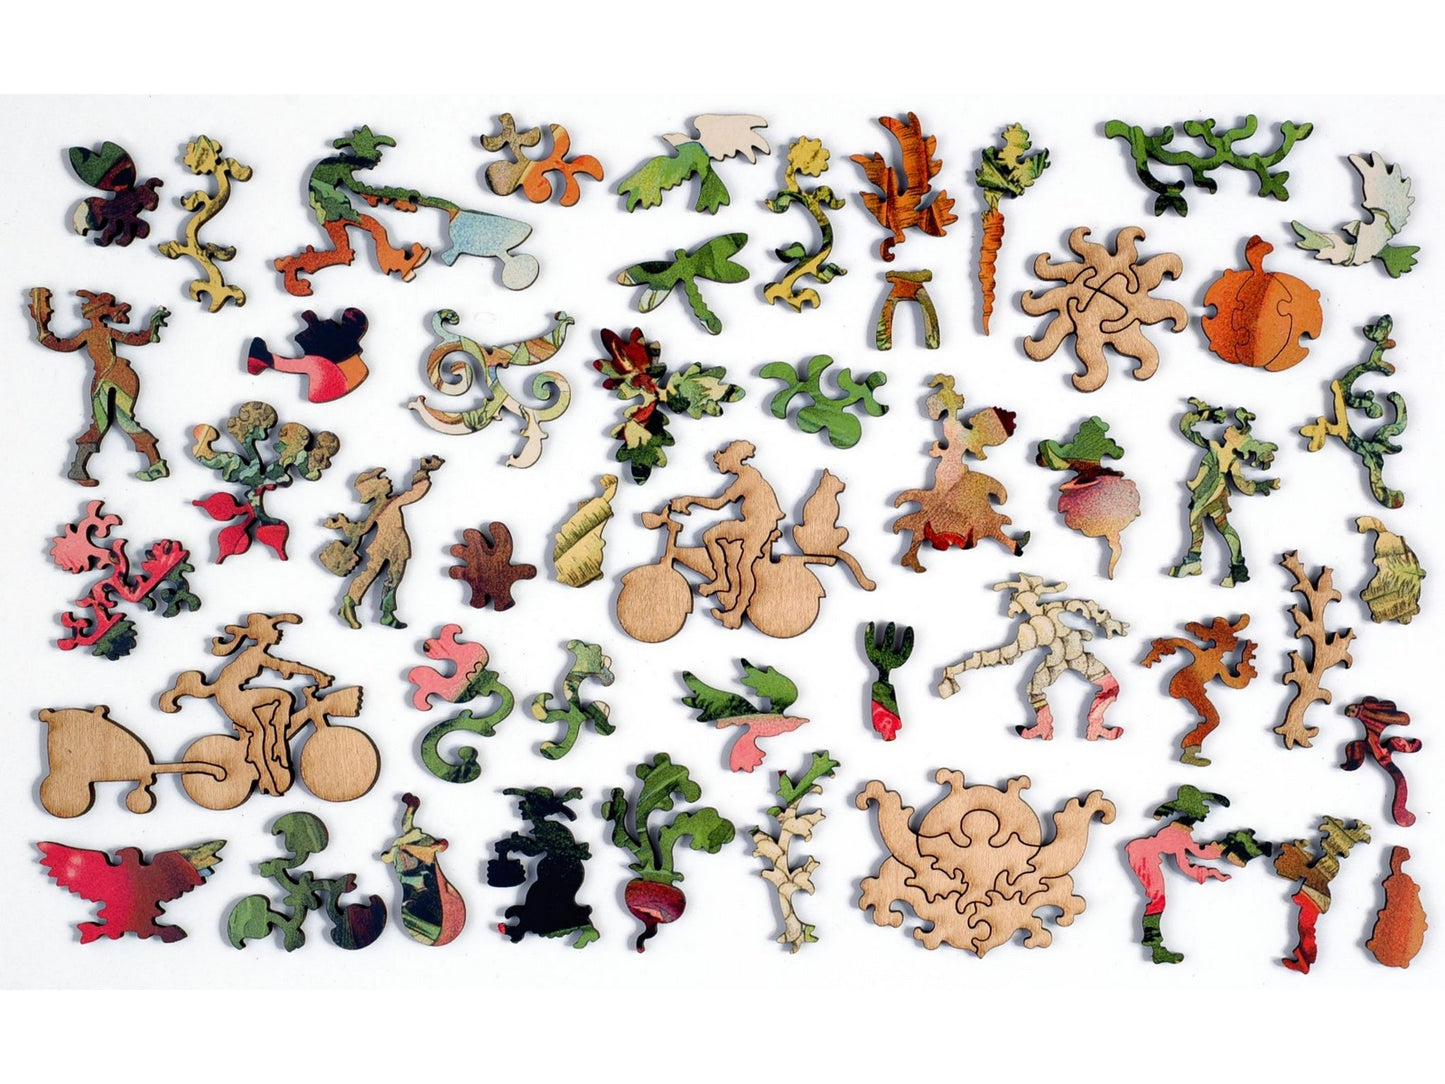 The whimsy pieces that can be found in the puzzle, Garden Harvest.